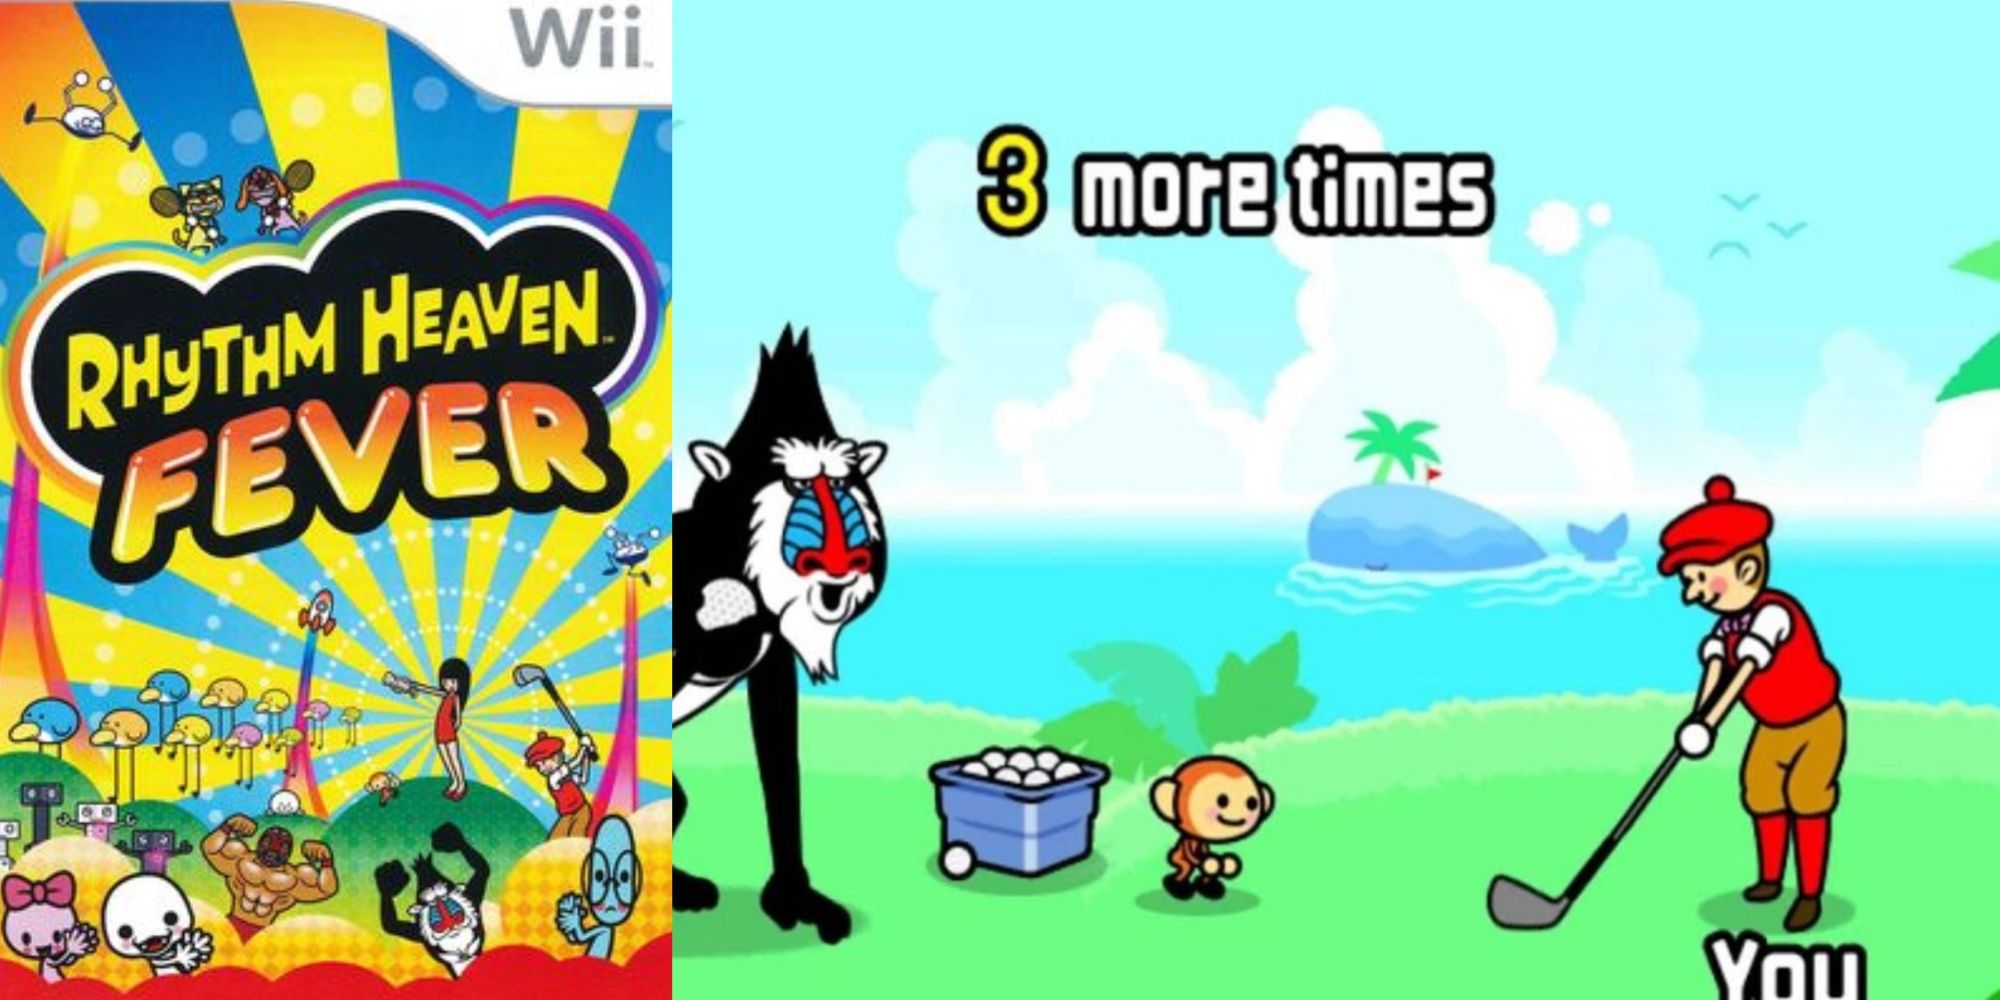 A split-image of the Wii artwork for Rhythm Heaven Fever and a golf minigame being played with the protagonist and some cute monkey characters.